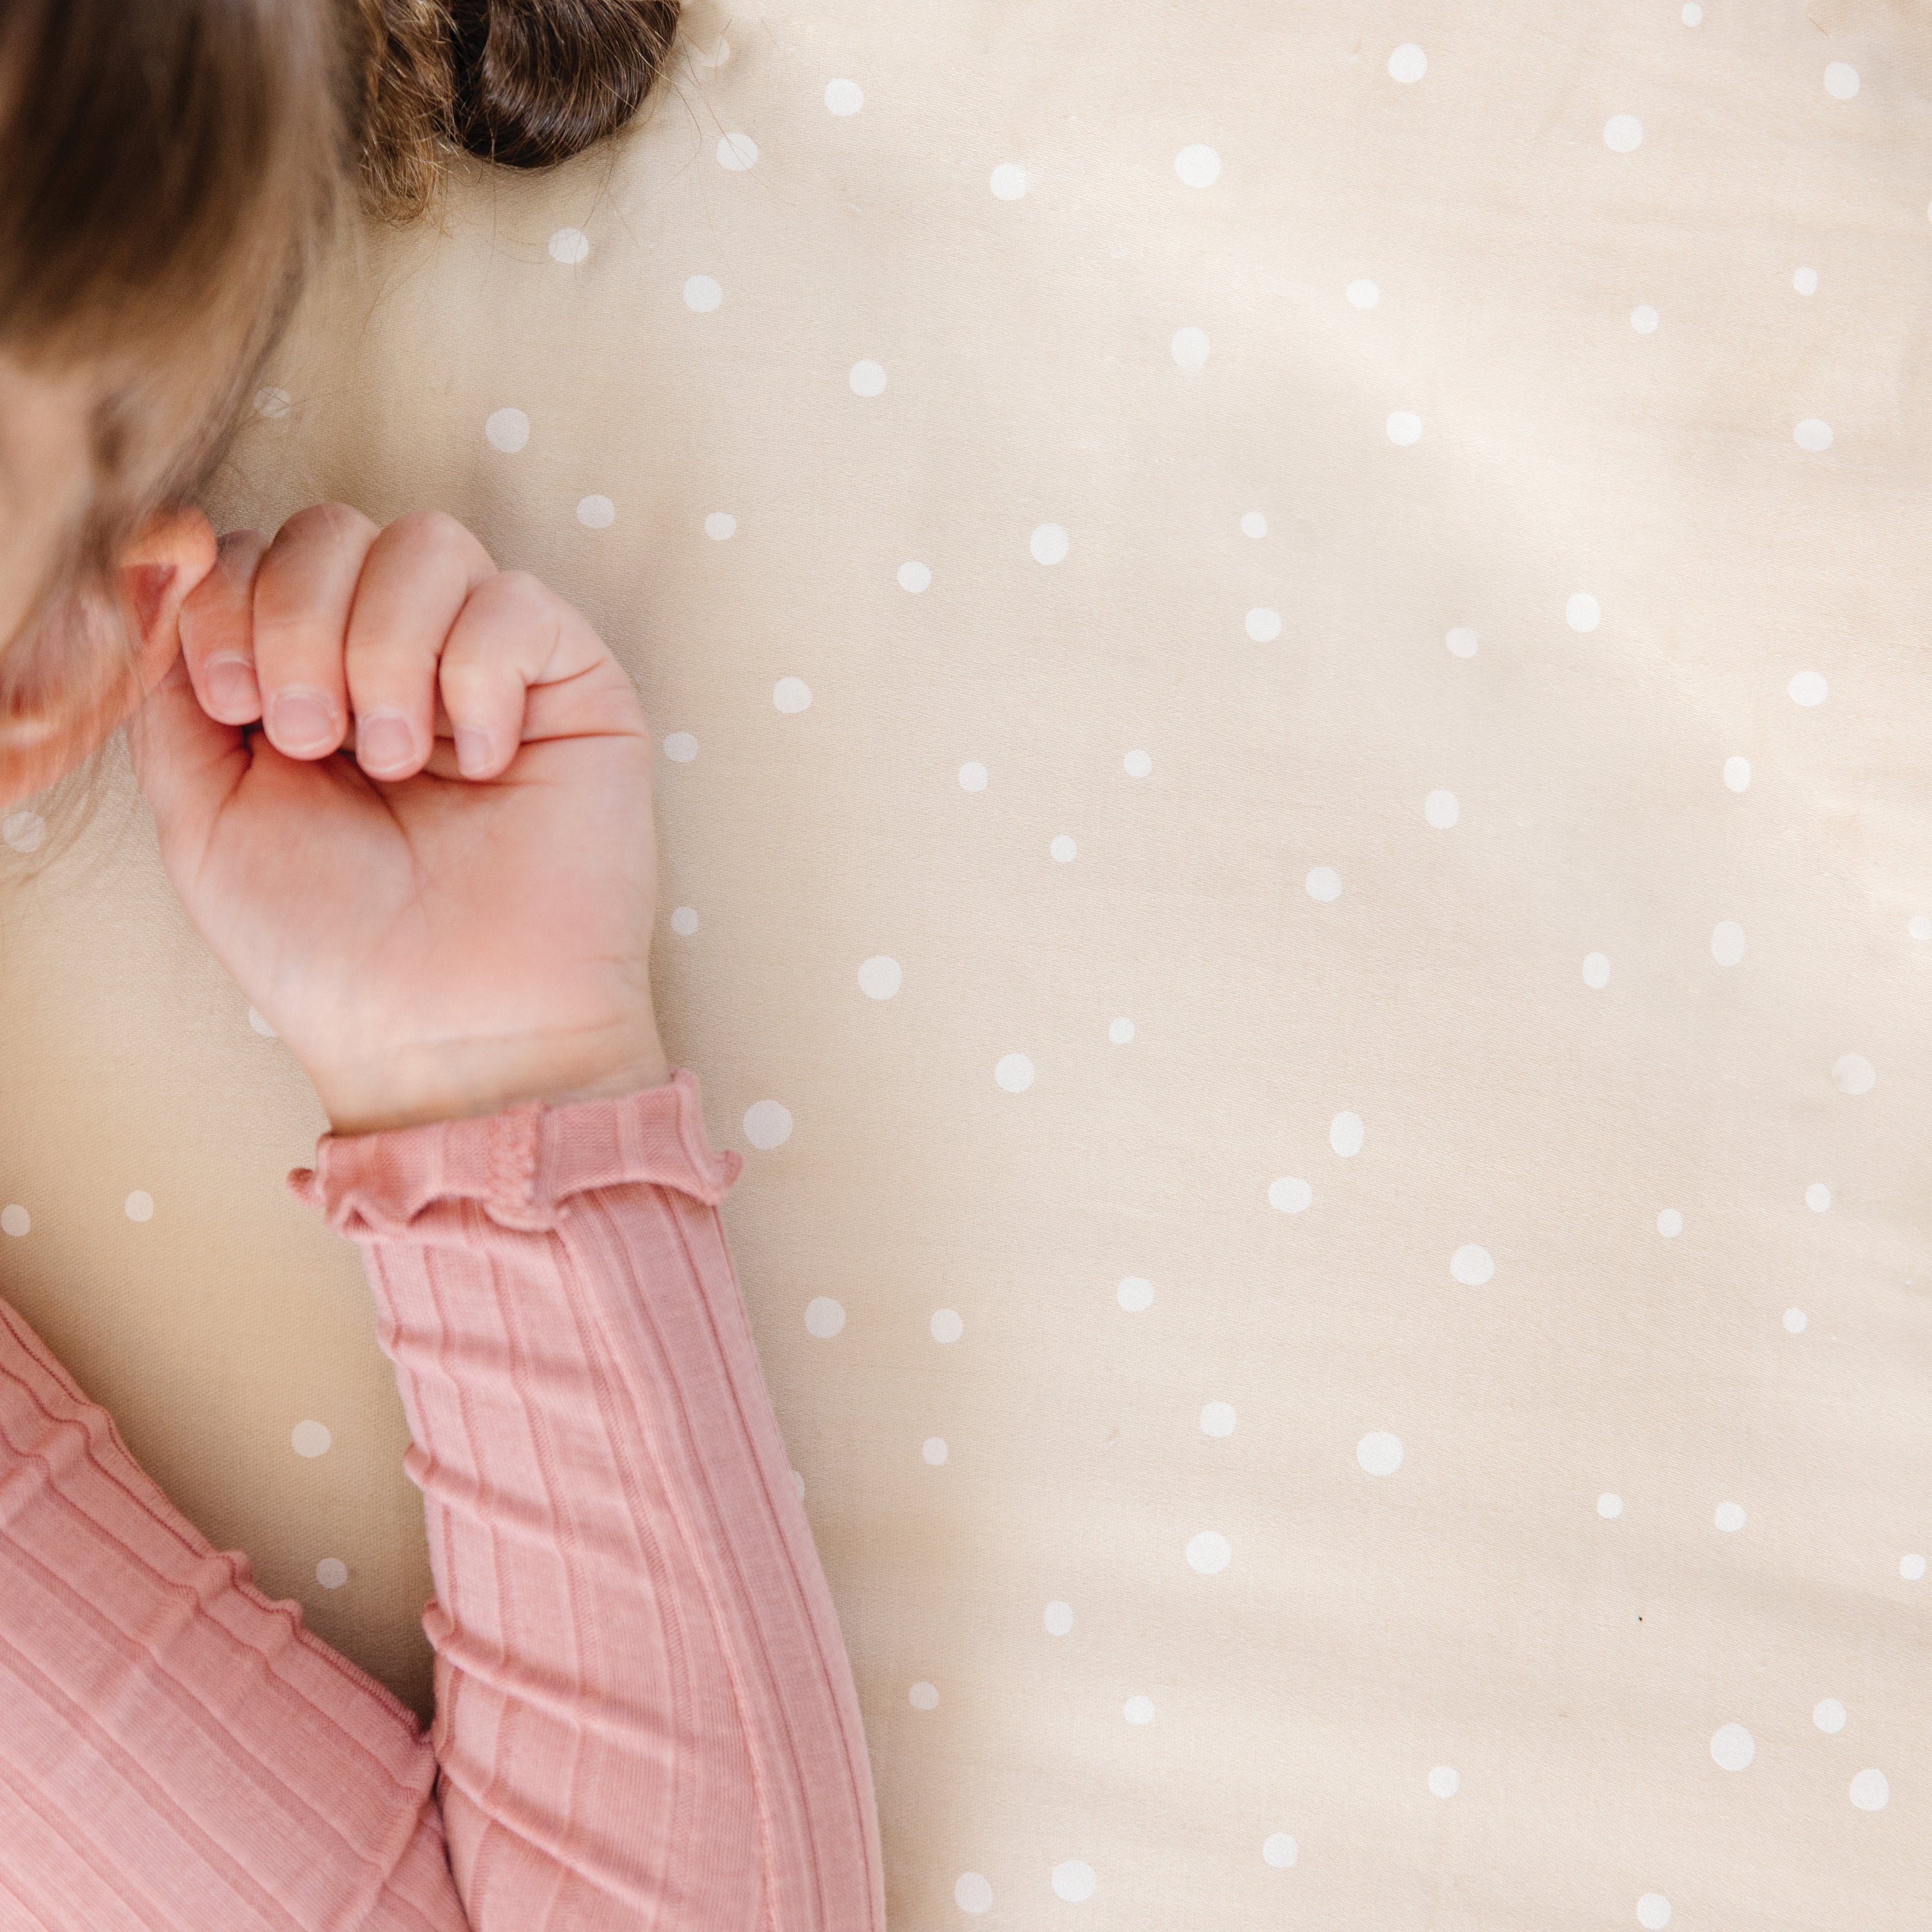 A young child, seen from the back, rests their head on their hand against a beige background with white polka dots, wearing a pink long-sleeve shirt made by Makemake Organics.